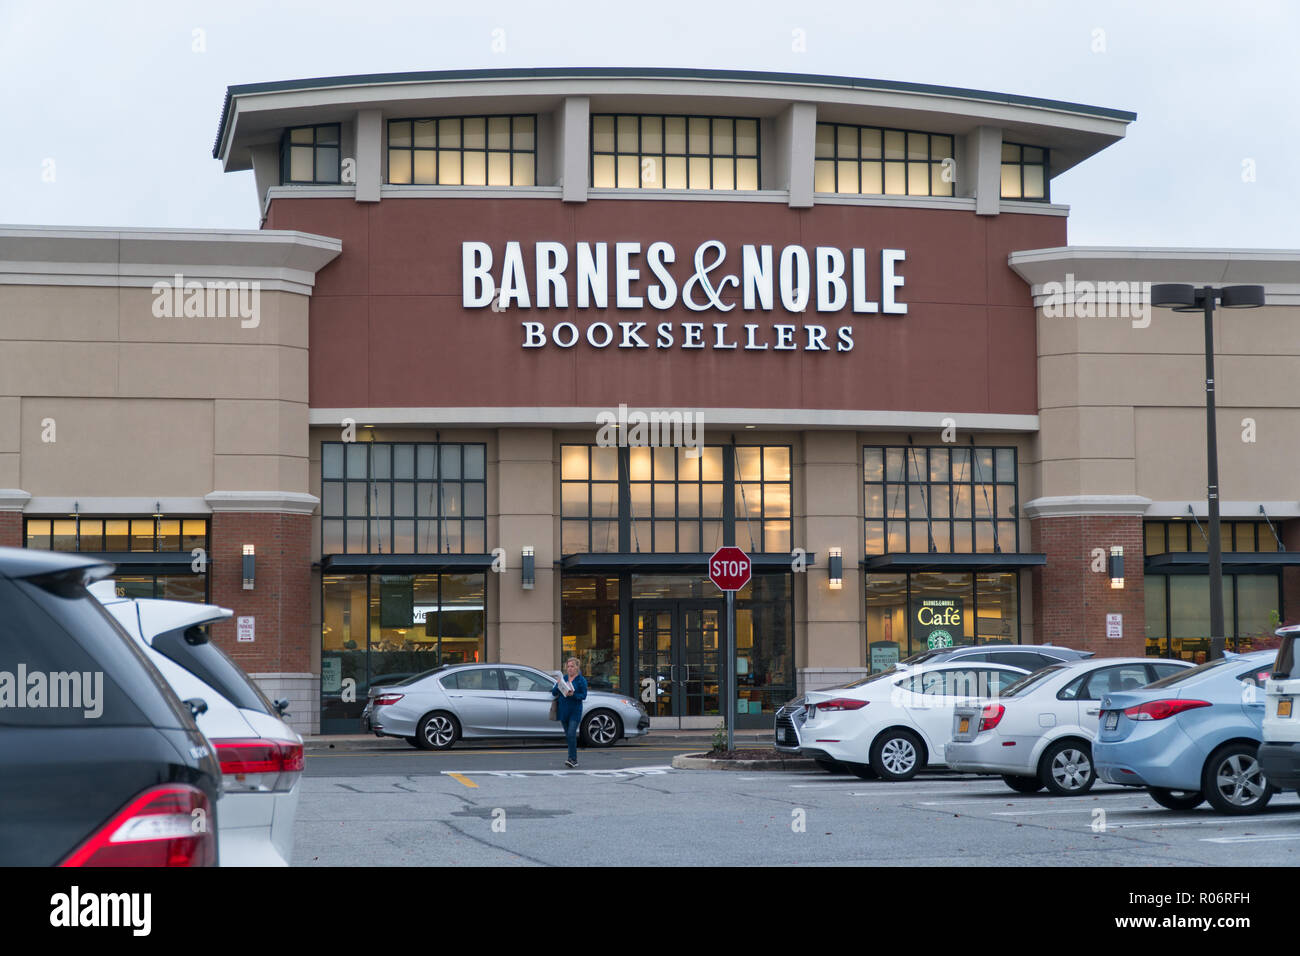 New York Usa Circa 18 Barnes Noble Booksellers Book Store Retail Location In Suburban Shopping Center Exterior Store Front Facade Signage Stock Photo Alamy